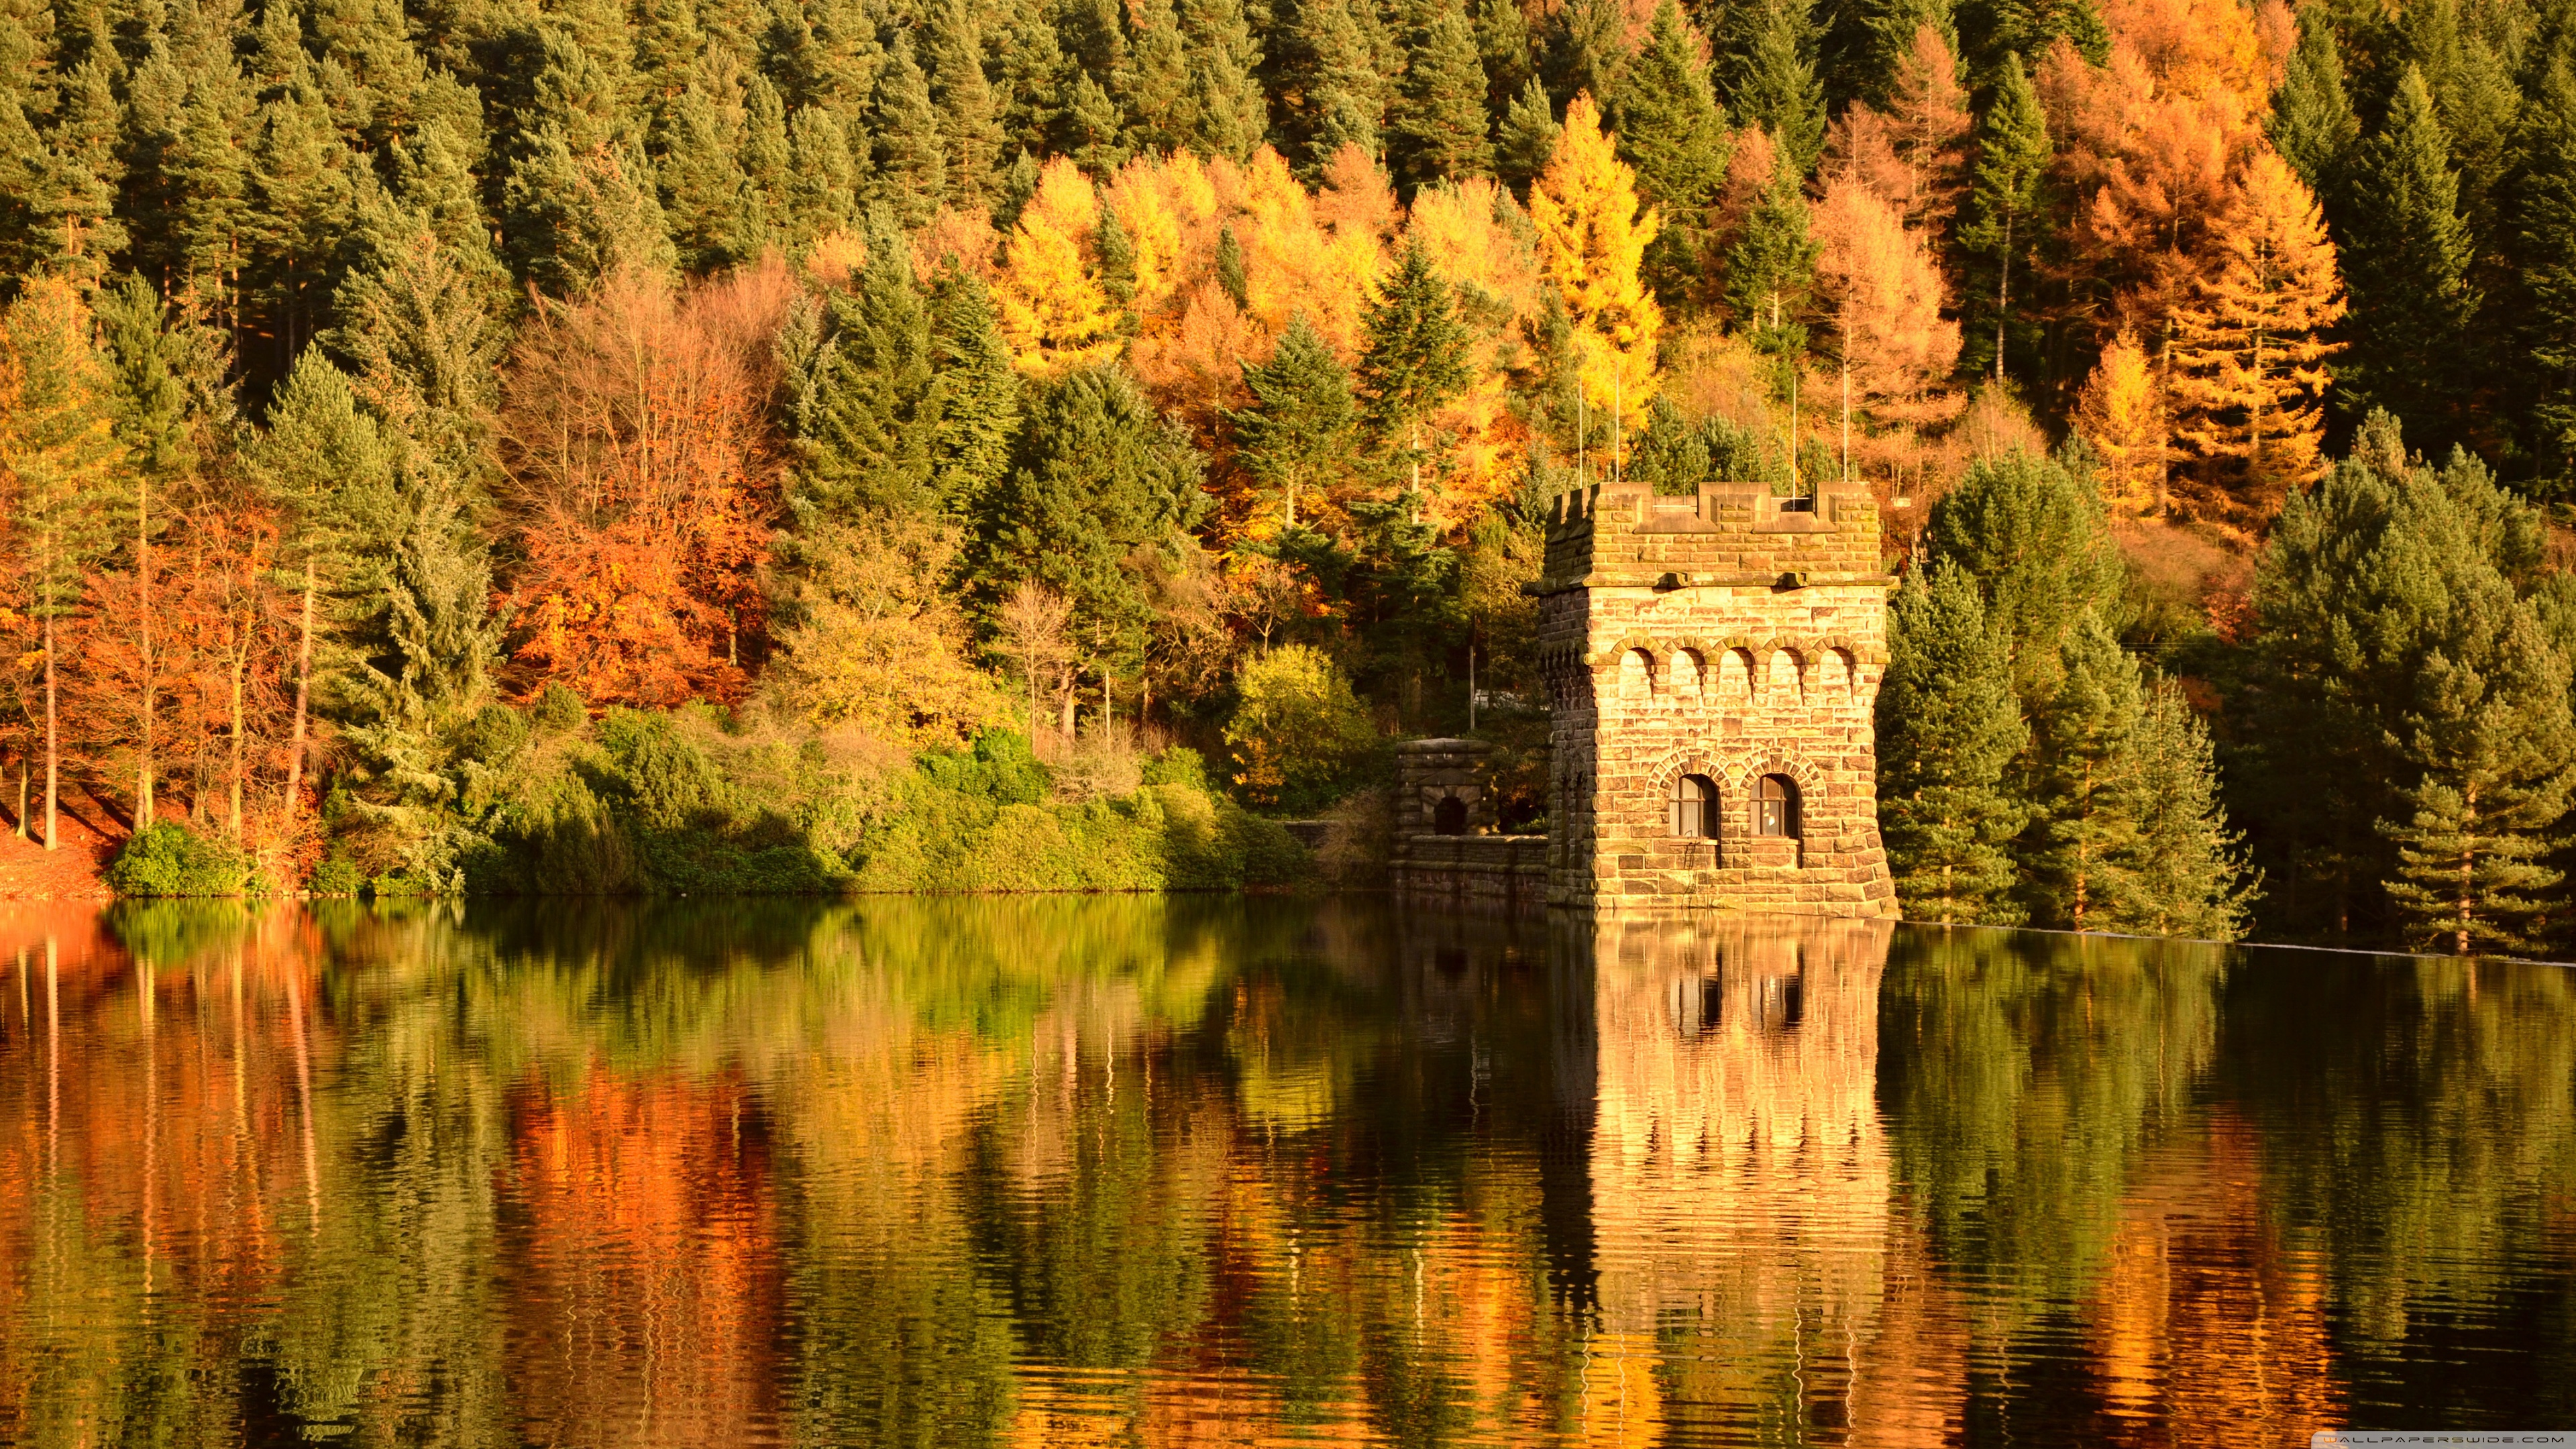 Small Lake Fortress, Autumn Ultra HD Desktop Background Wallpaper for 4K UHD TV, Multi Display, Dual Monitor, Tablet